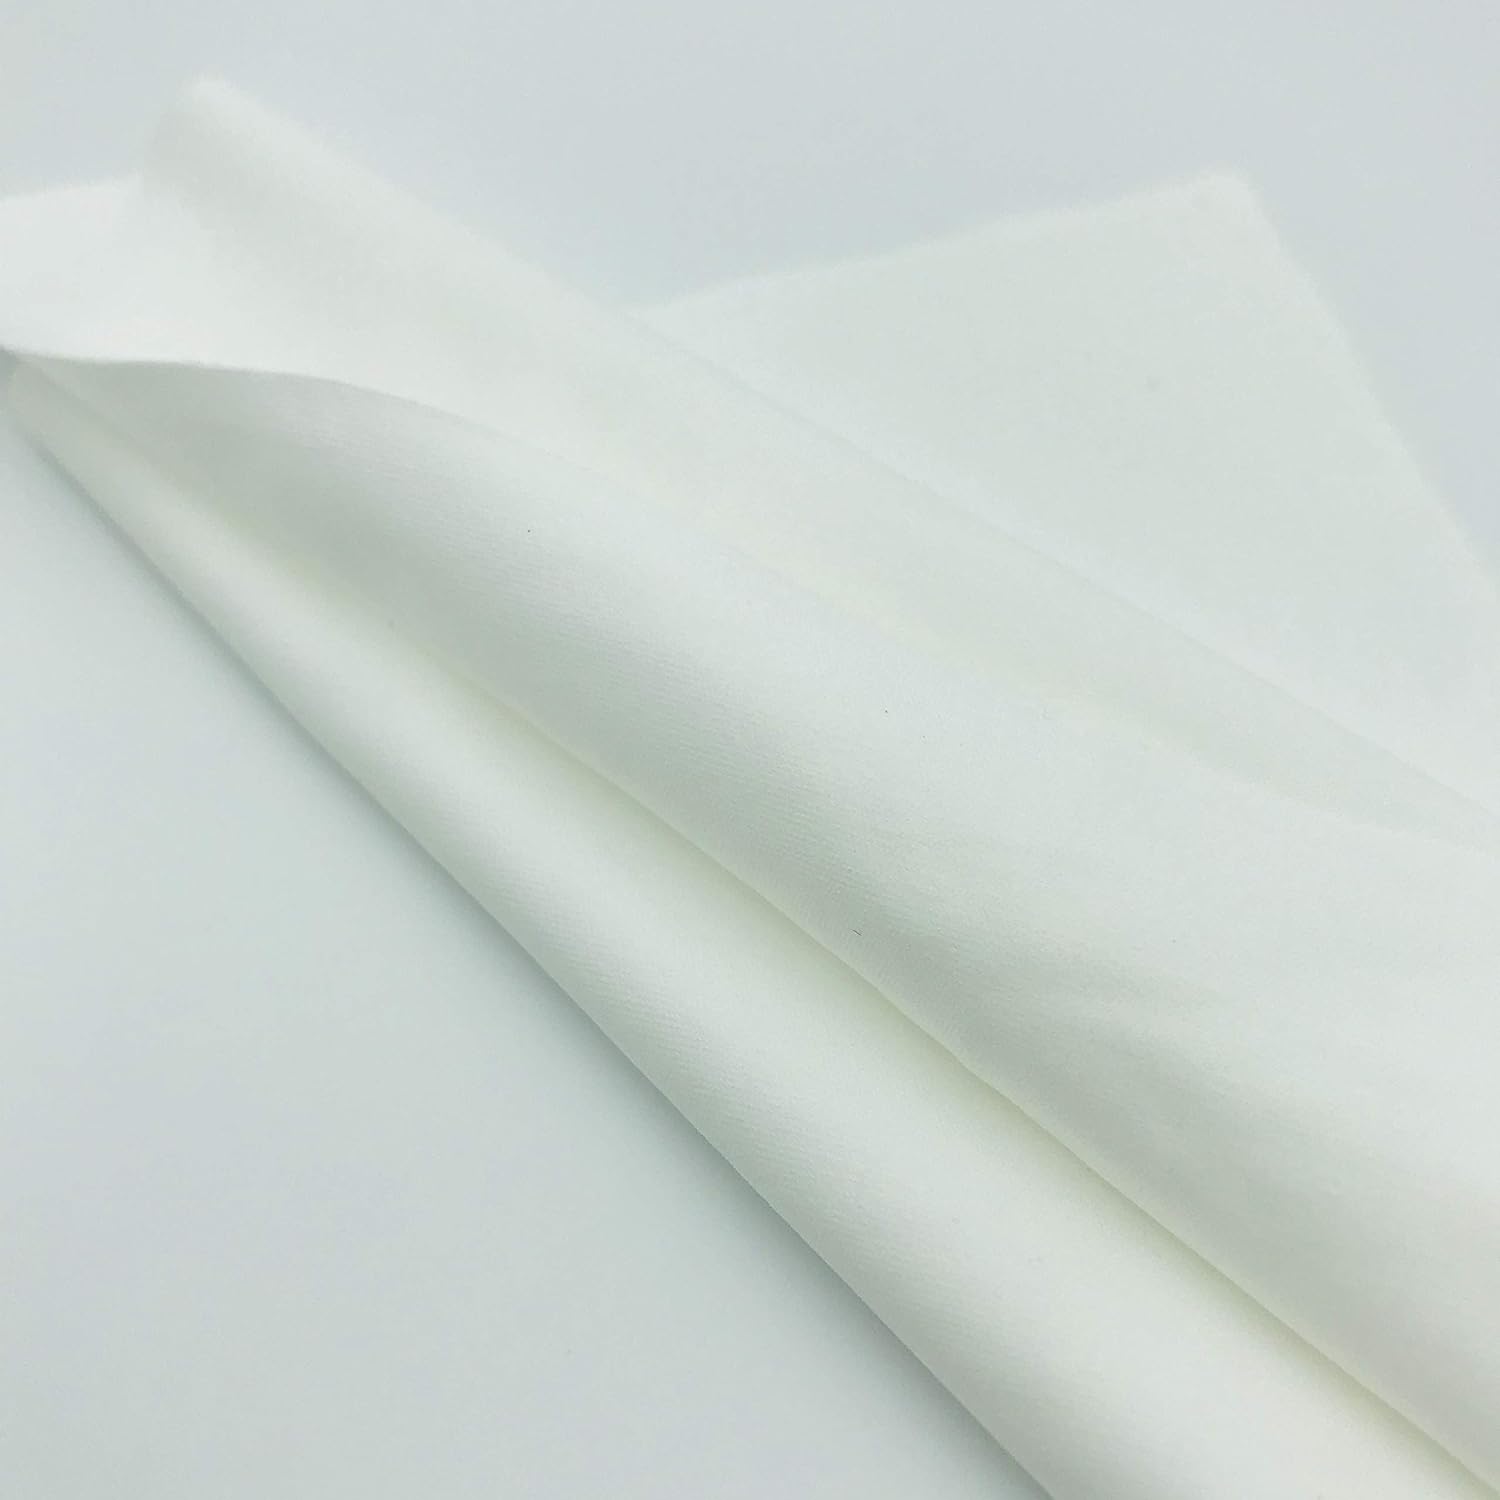 Critical Environments Cleanroom Double Knit 100% Polyester Wipers 6"x6" Parmaceutical Disposable Wipes for Critical Delicate Task(Starting at 1 Box with 6,000 Wipes per 40 Bags) (No. CP12006)